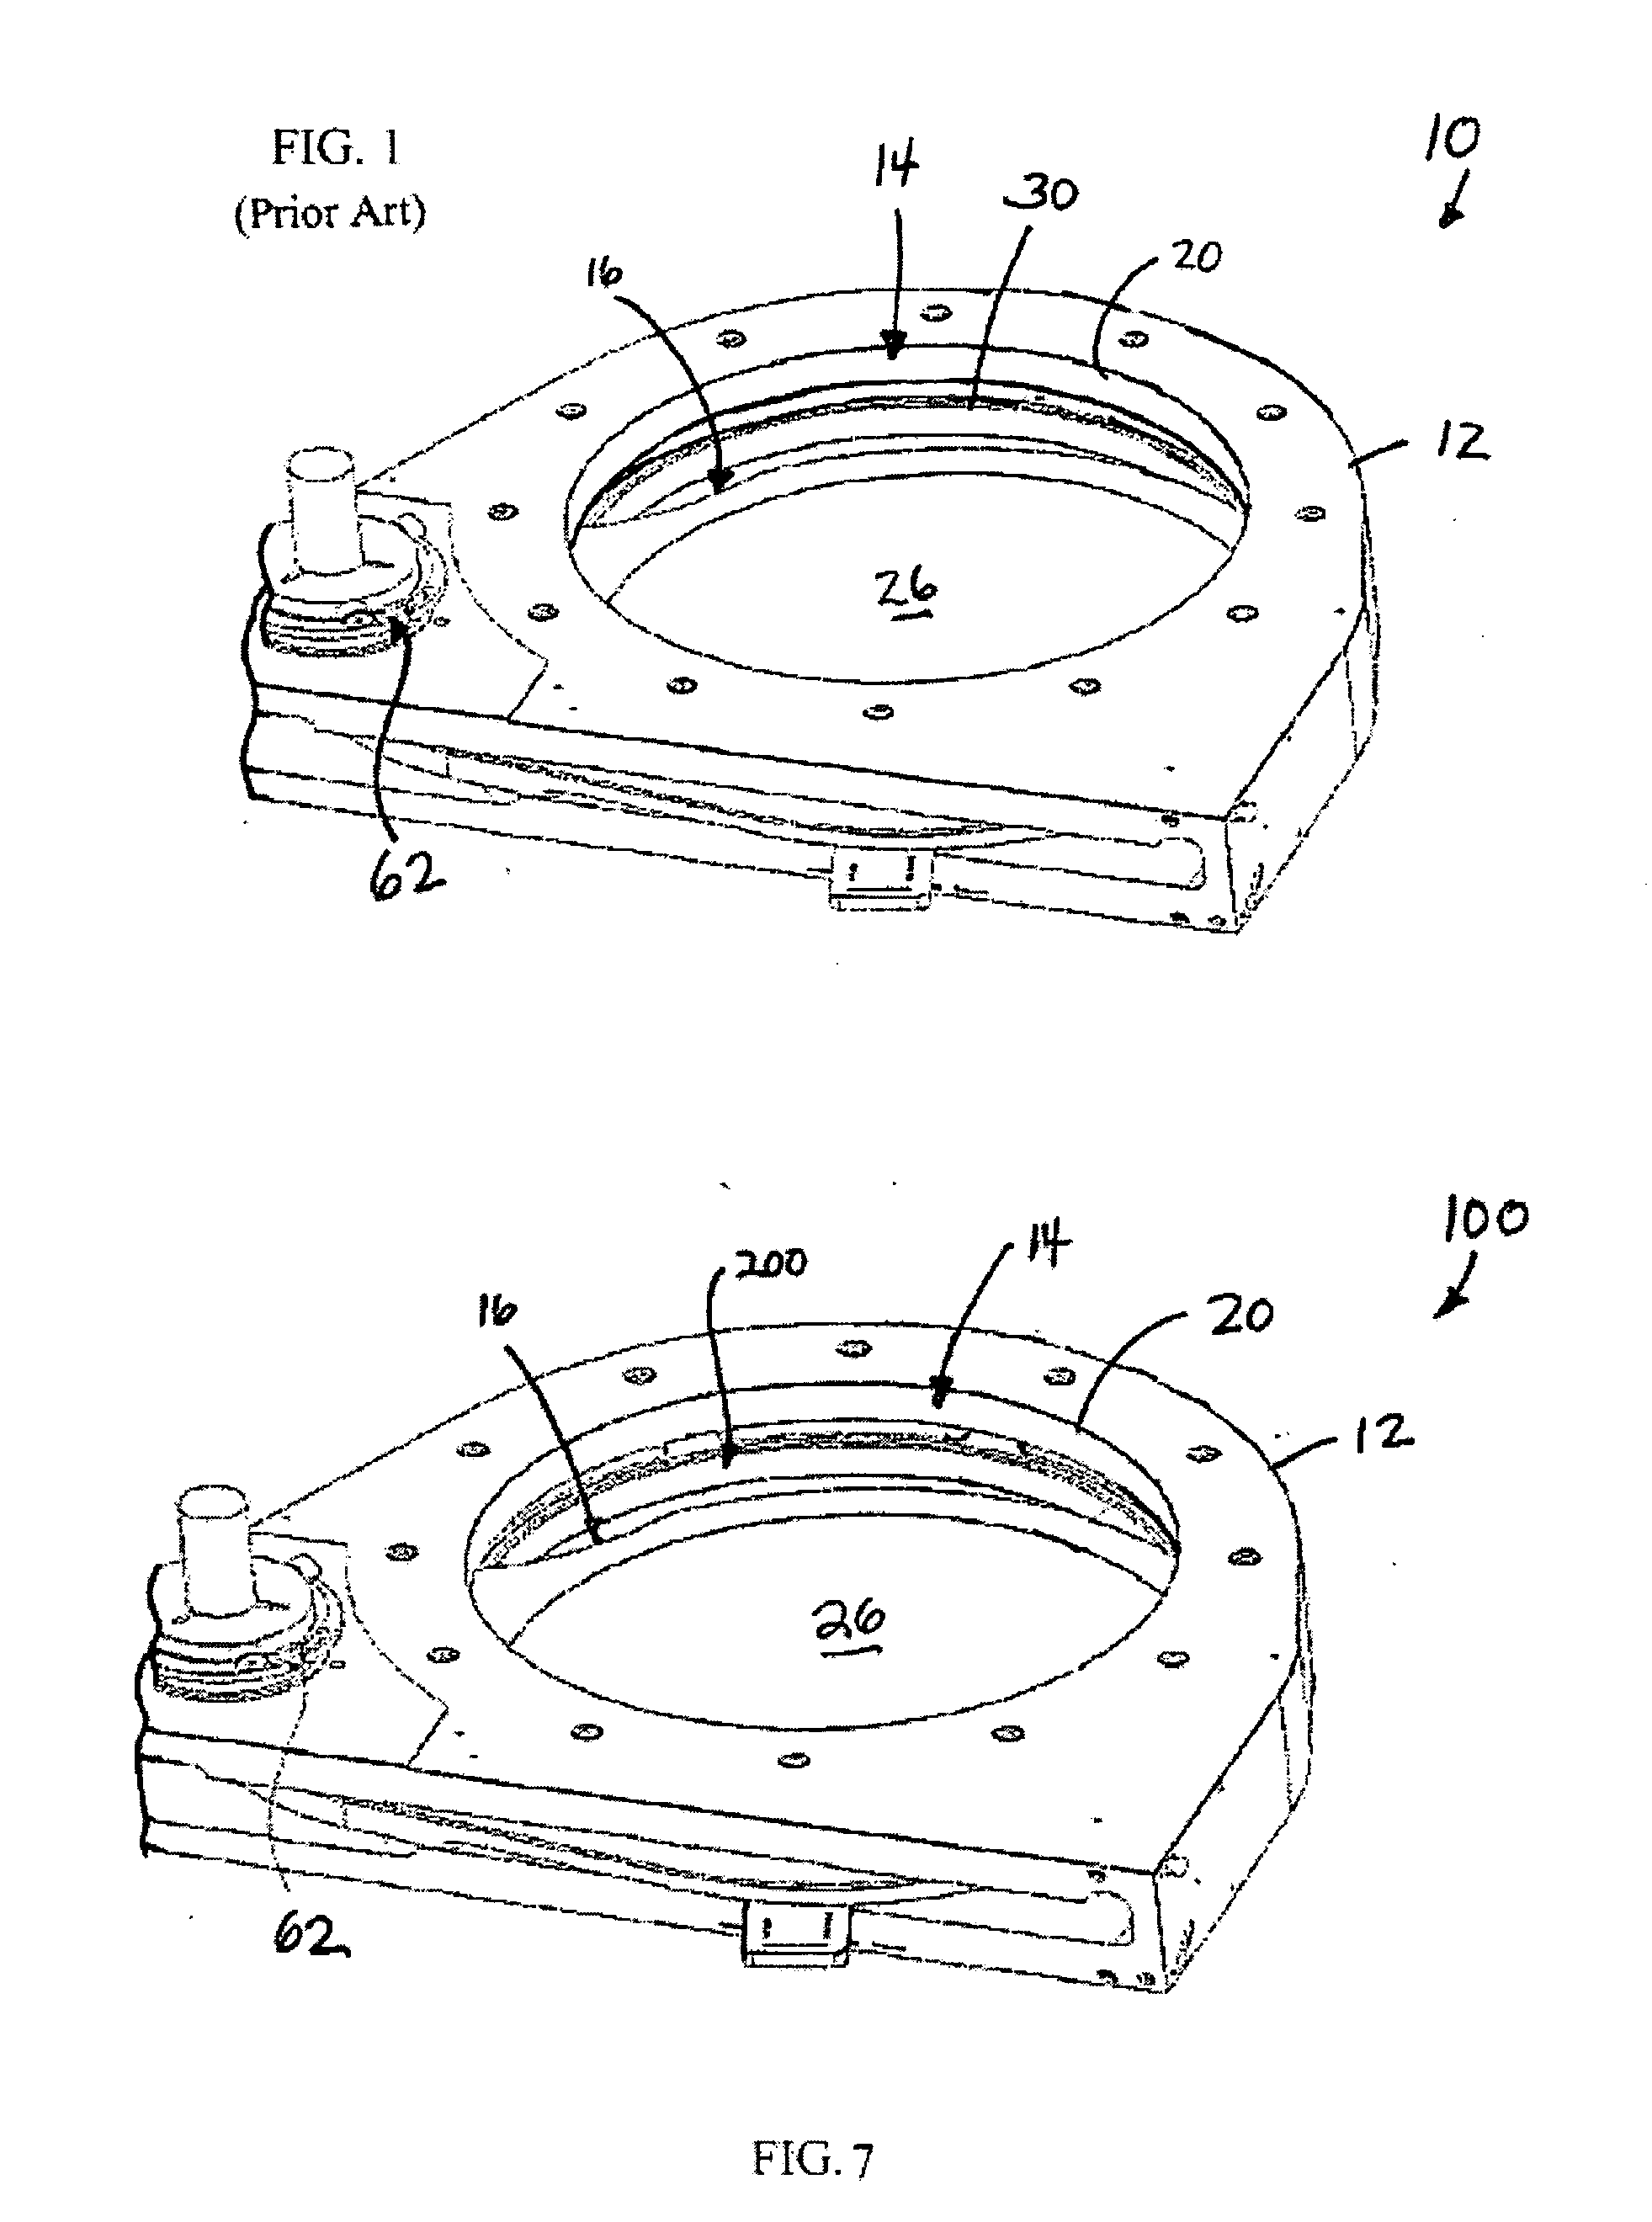 Valve assembly having improved conductance control